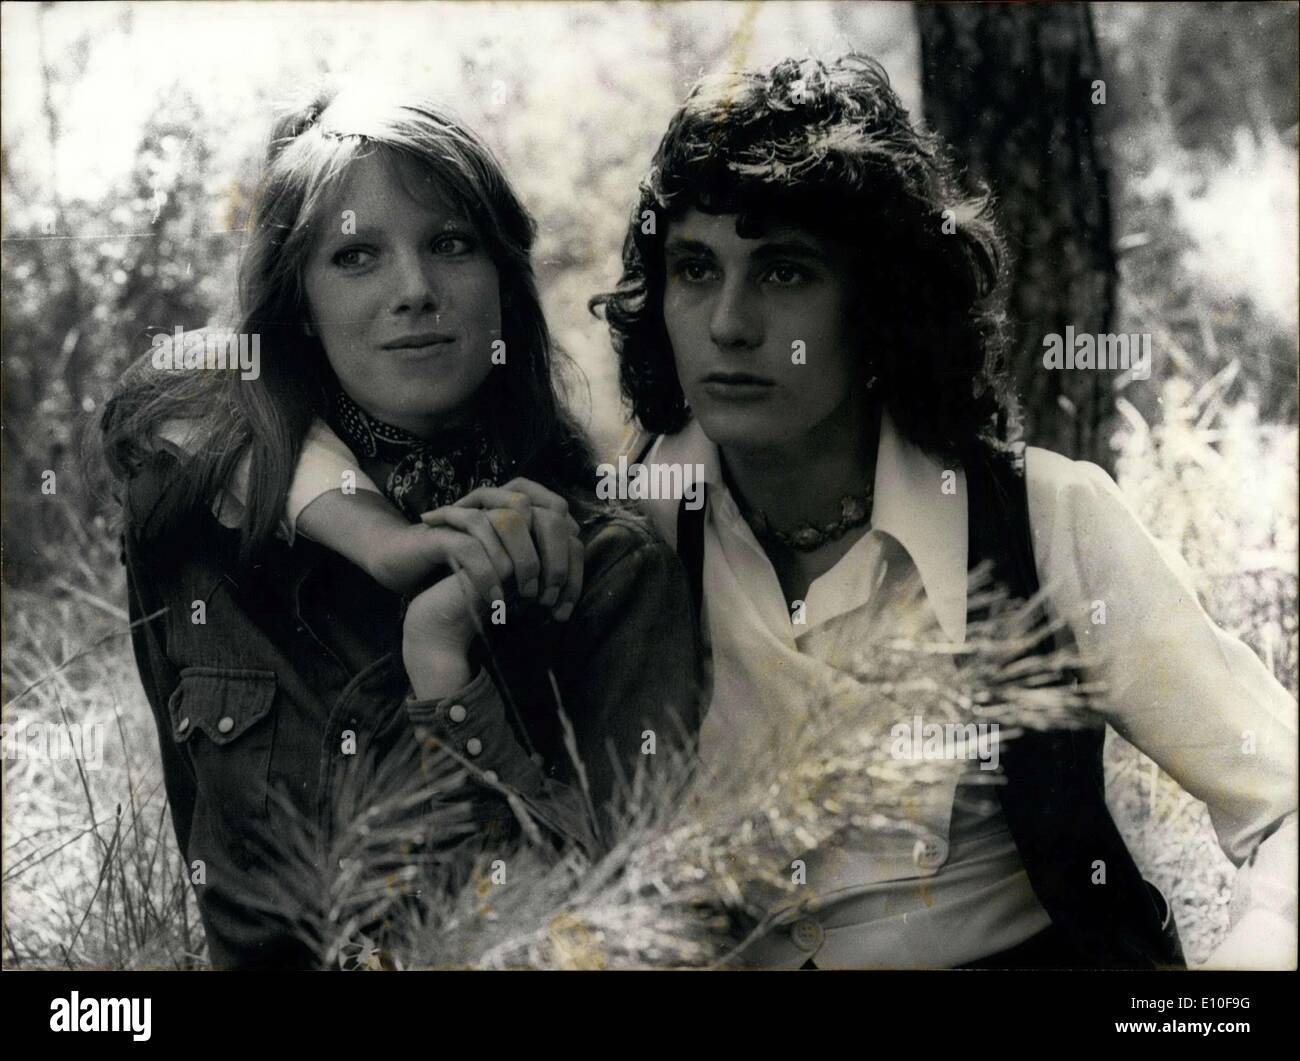 Sep. 15, 1972 - The movie is directed by Francois Peichenbach. They play two young lovers.  US Stock Photo